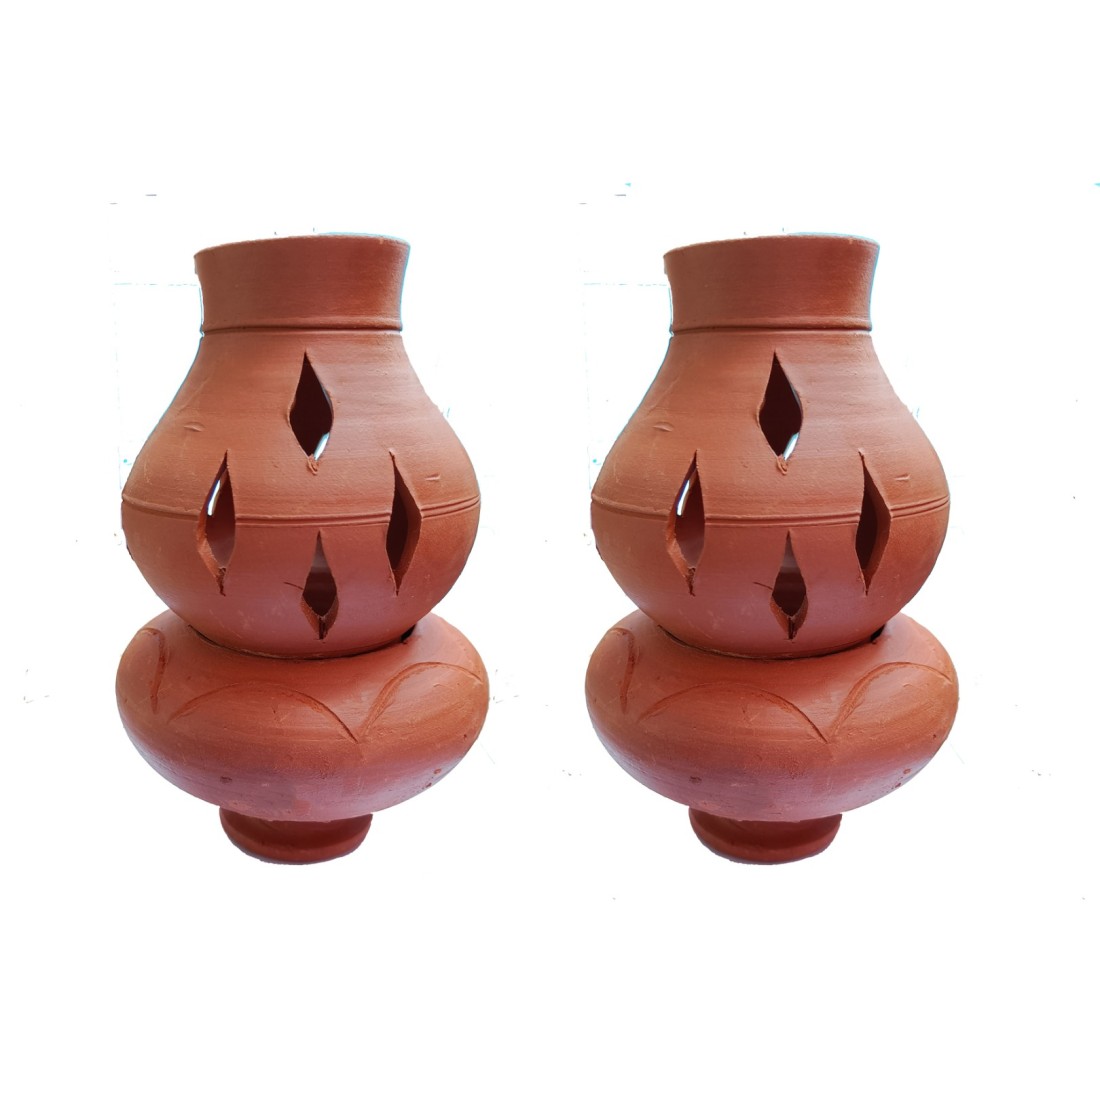 Tillage-Terracotta Clay Oil lamp Decorative Diya with lid for Home Decoration & Puja (Closed LAMP)pack of 2 1